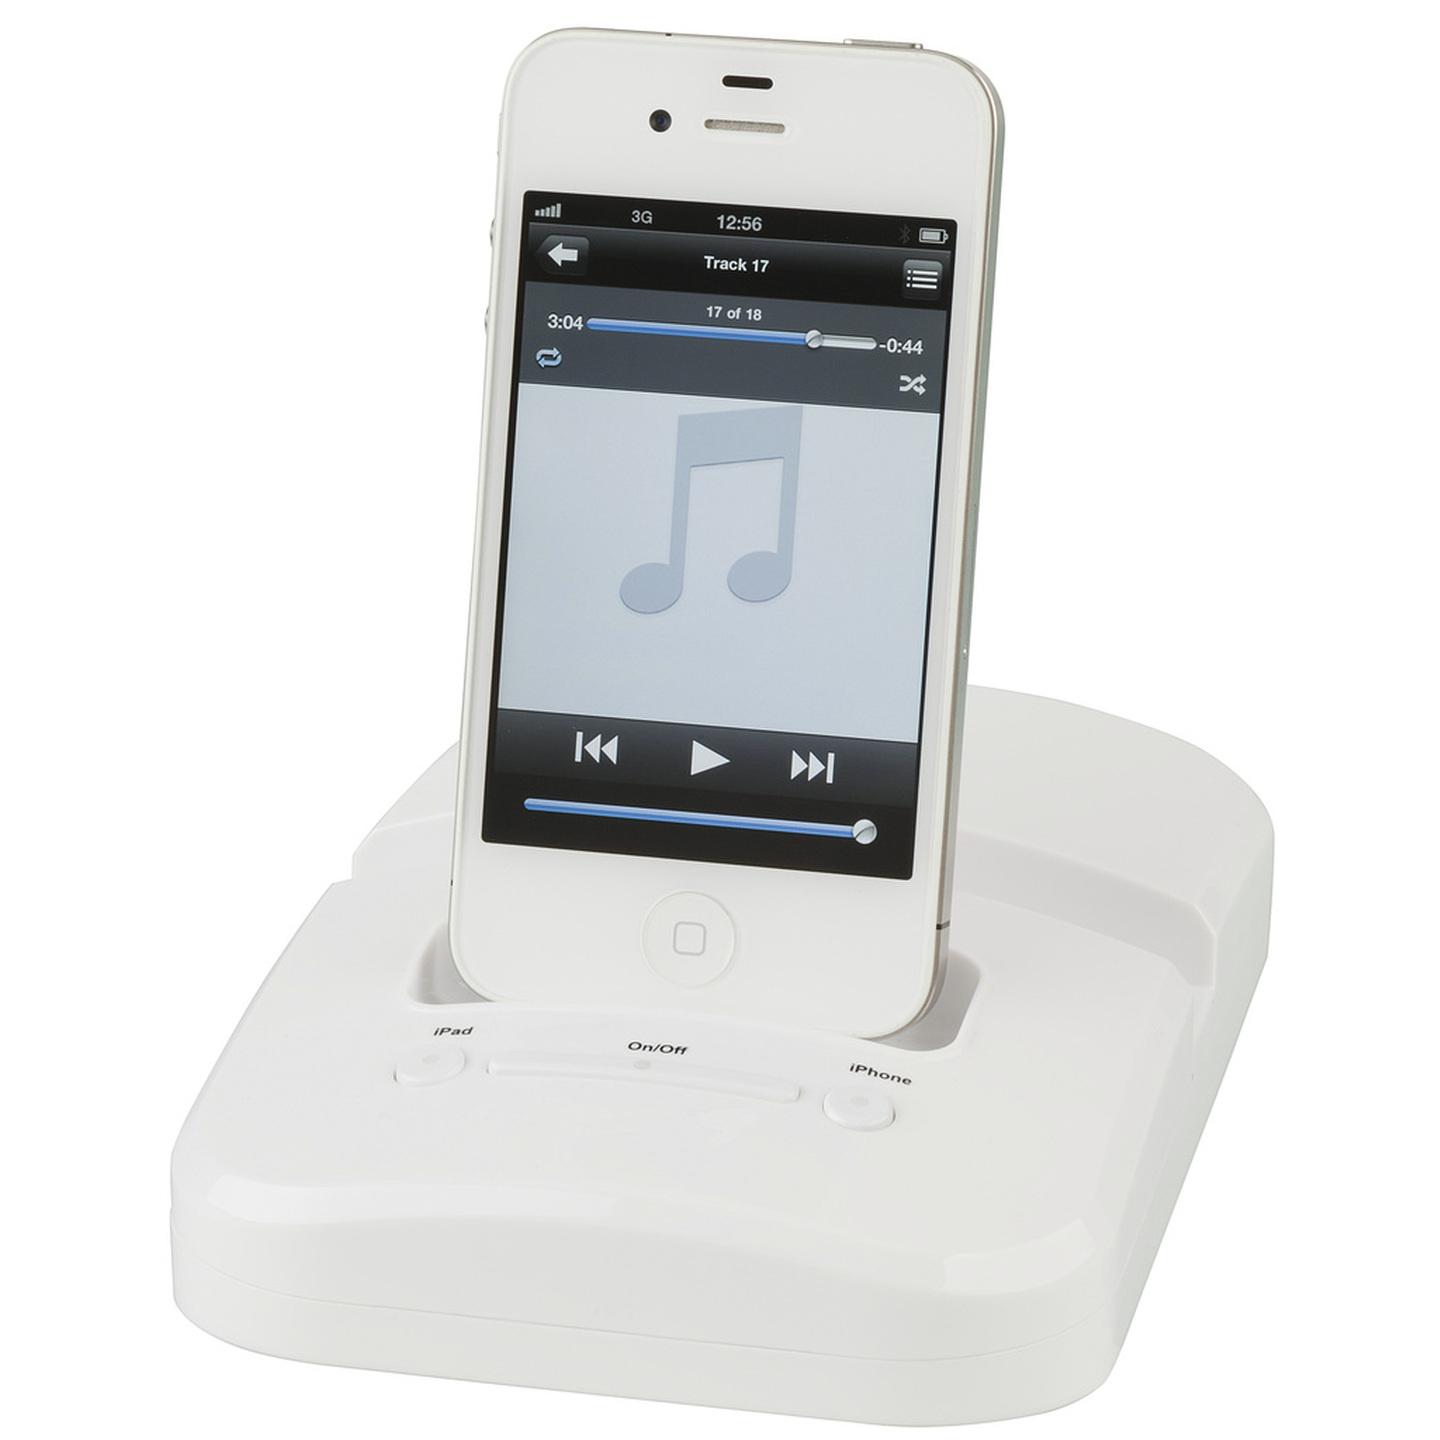 Docking Station and Dual Charger for iPad and iPhone/iPod